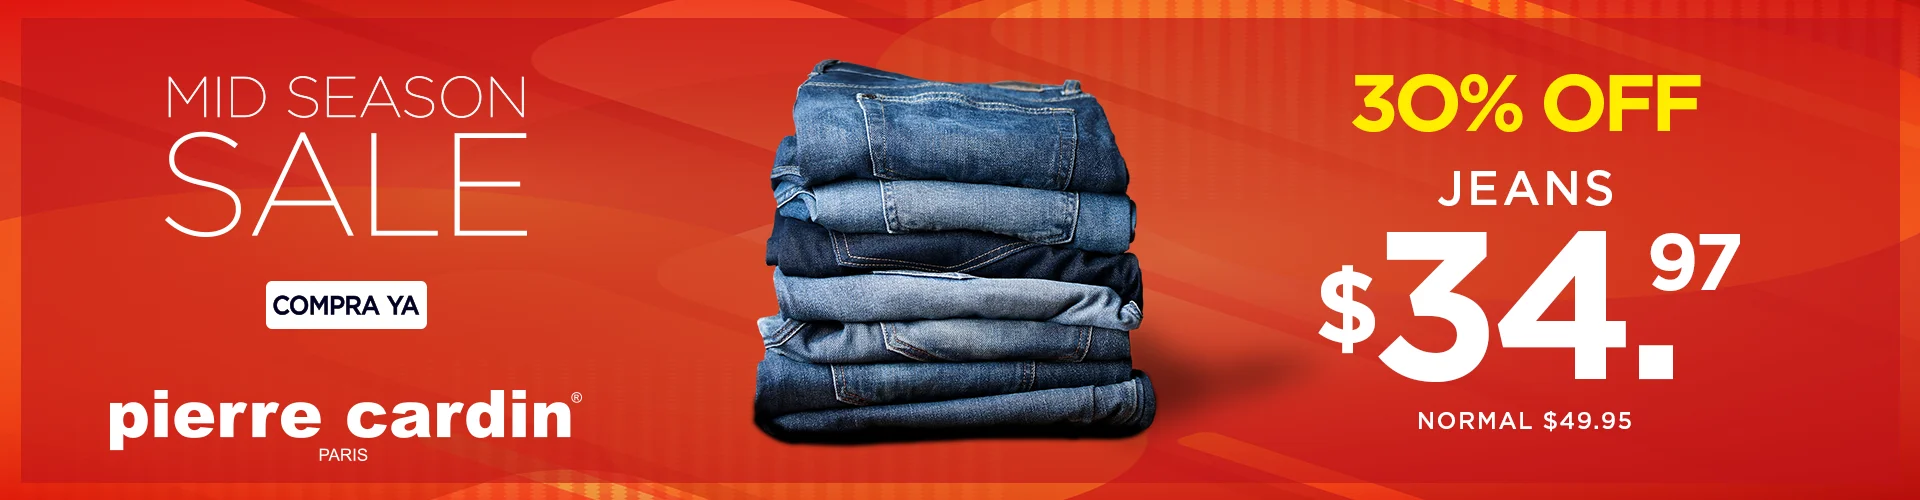 jeans 30% offm